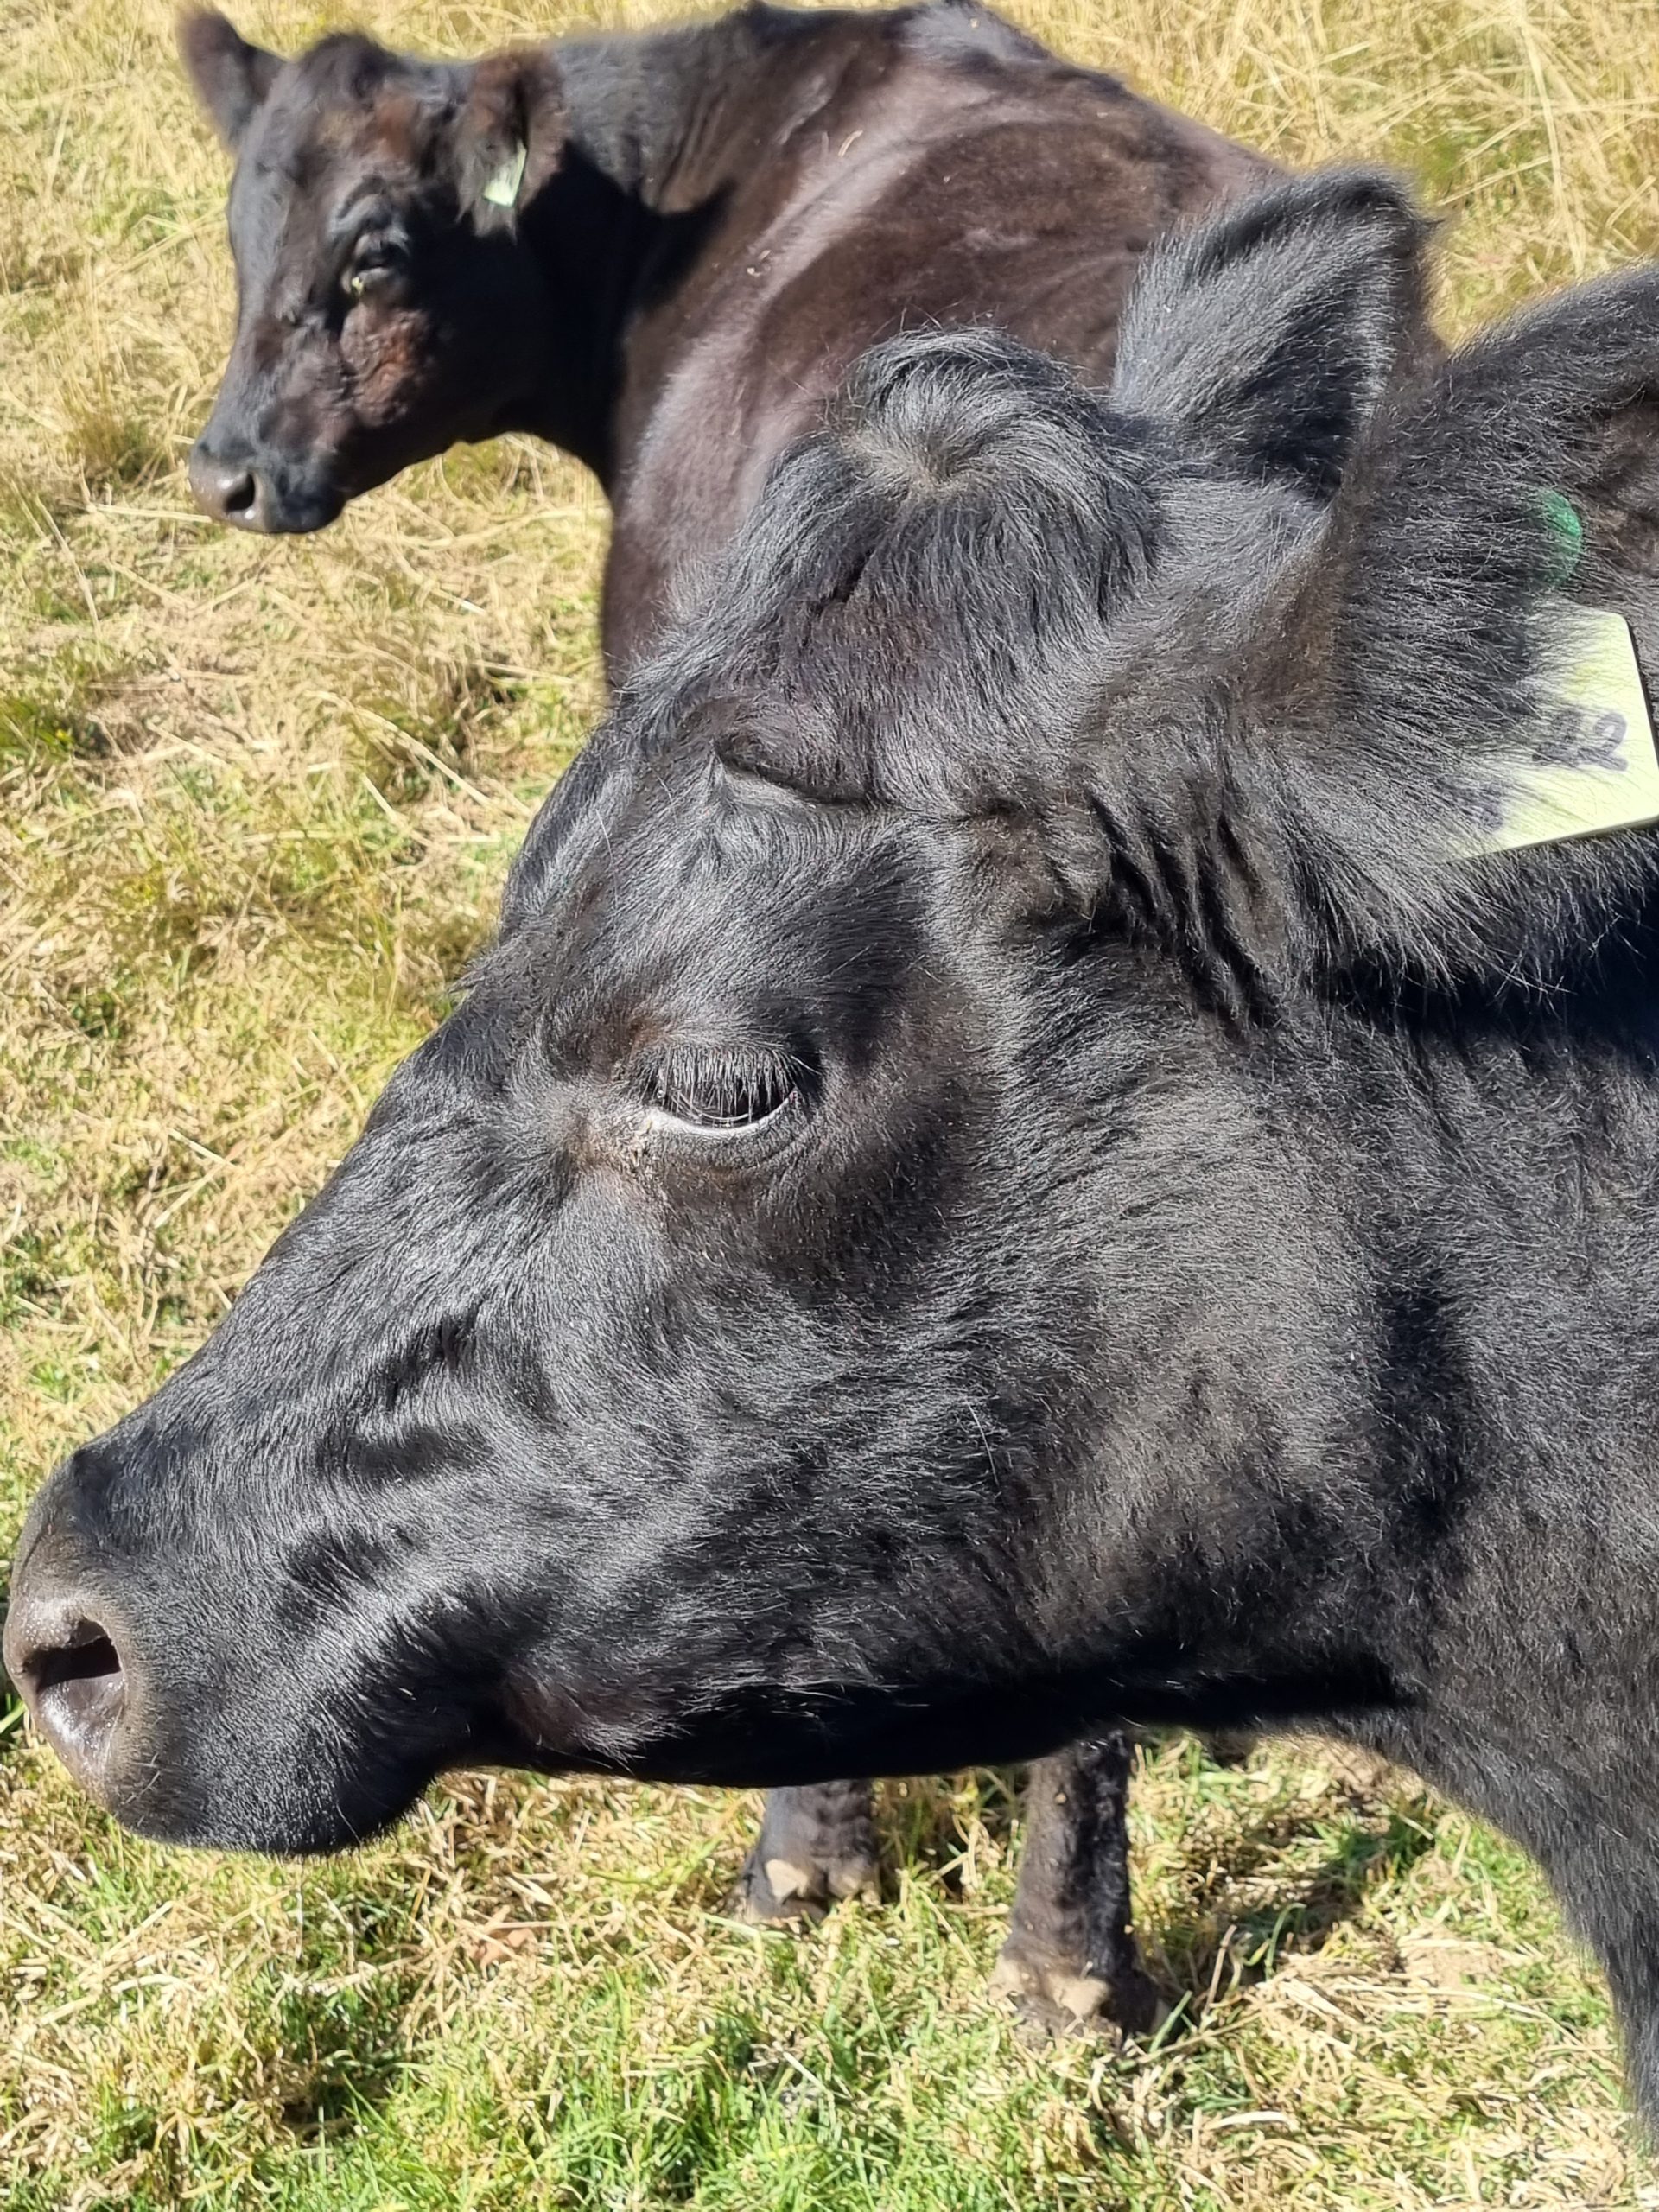 A Black Angus cow head in the foreground